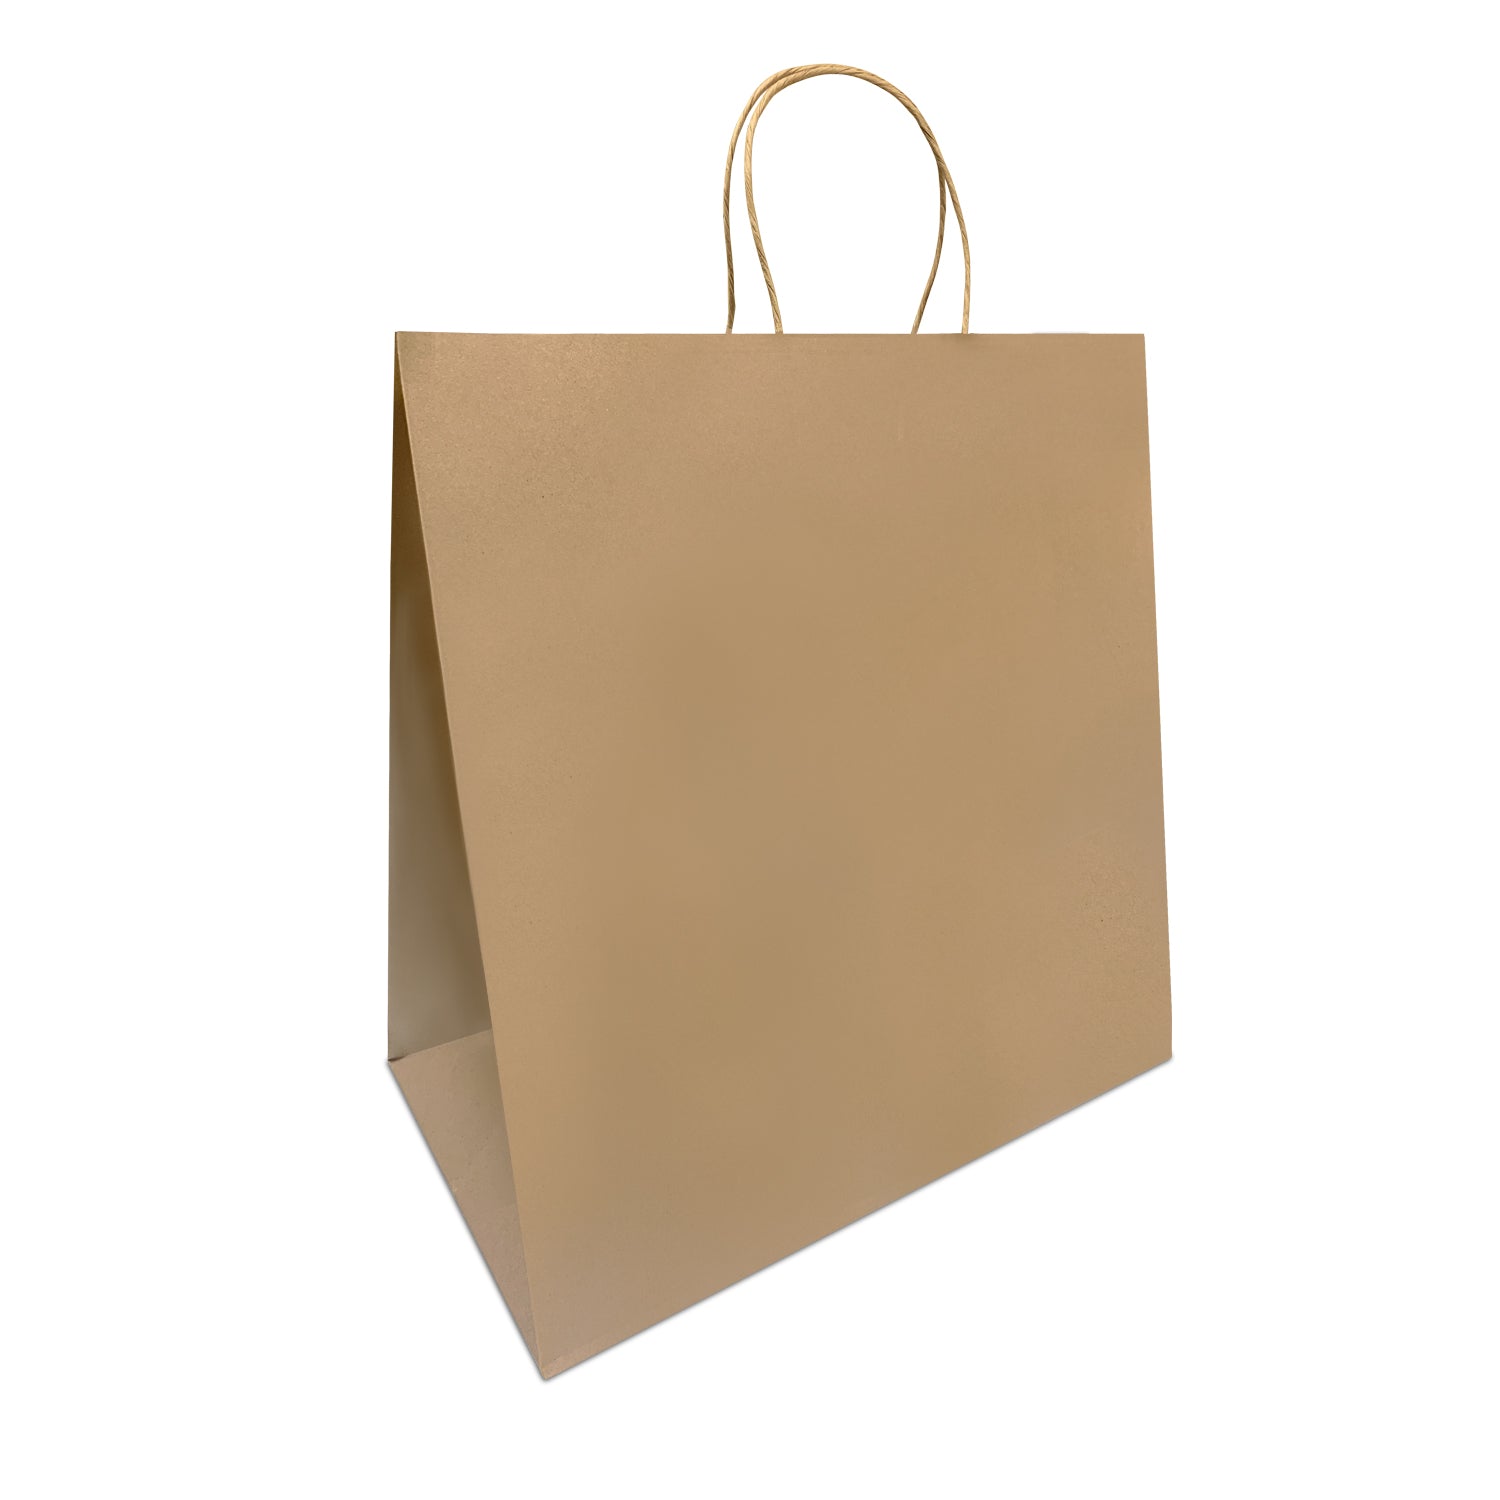 200 Pcs, Tiger, 14x8x14 inches, Kraft Paper Bags, with Twisted Handle